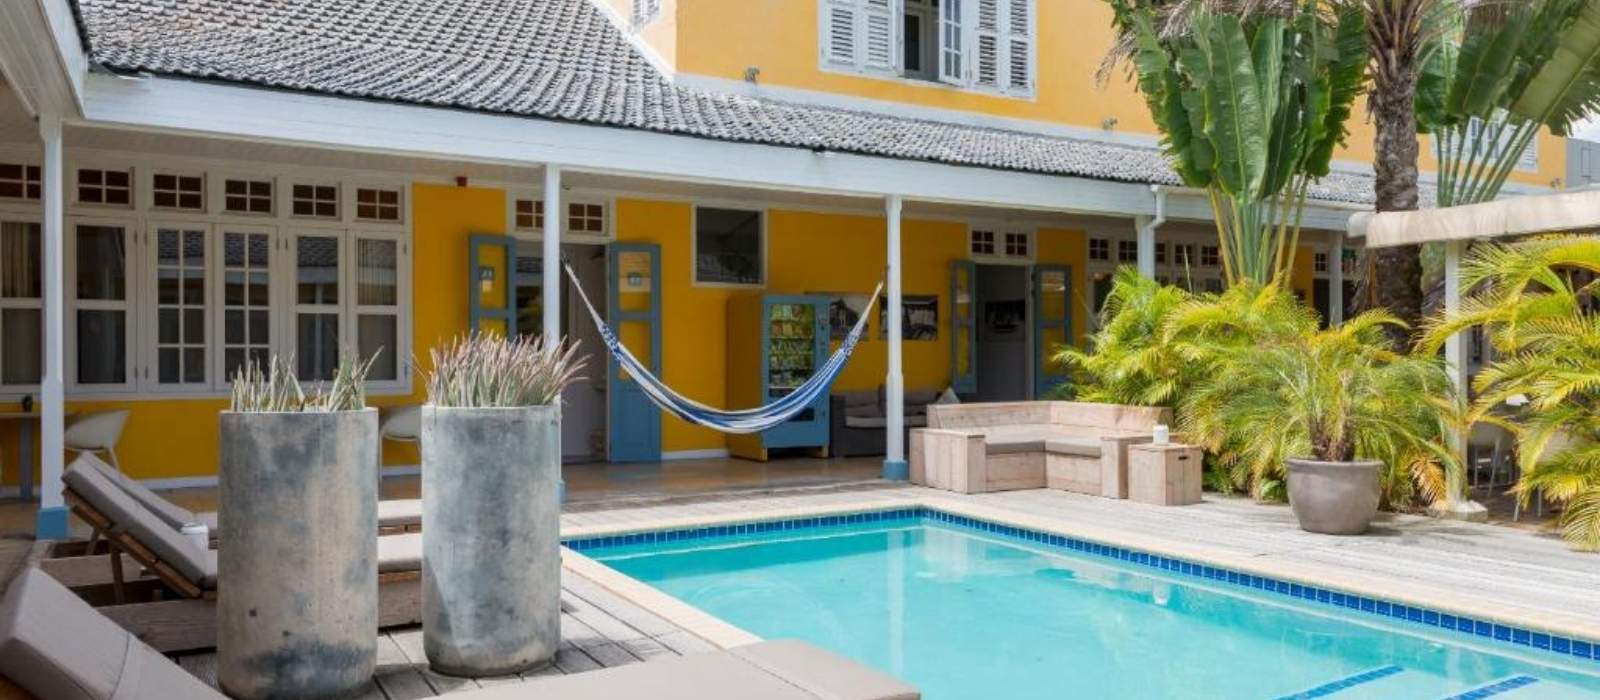 Boutique Hotel 't Klooster - Boutique Hotel Curacao